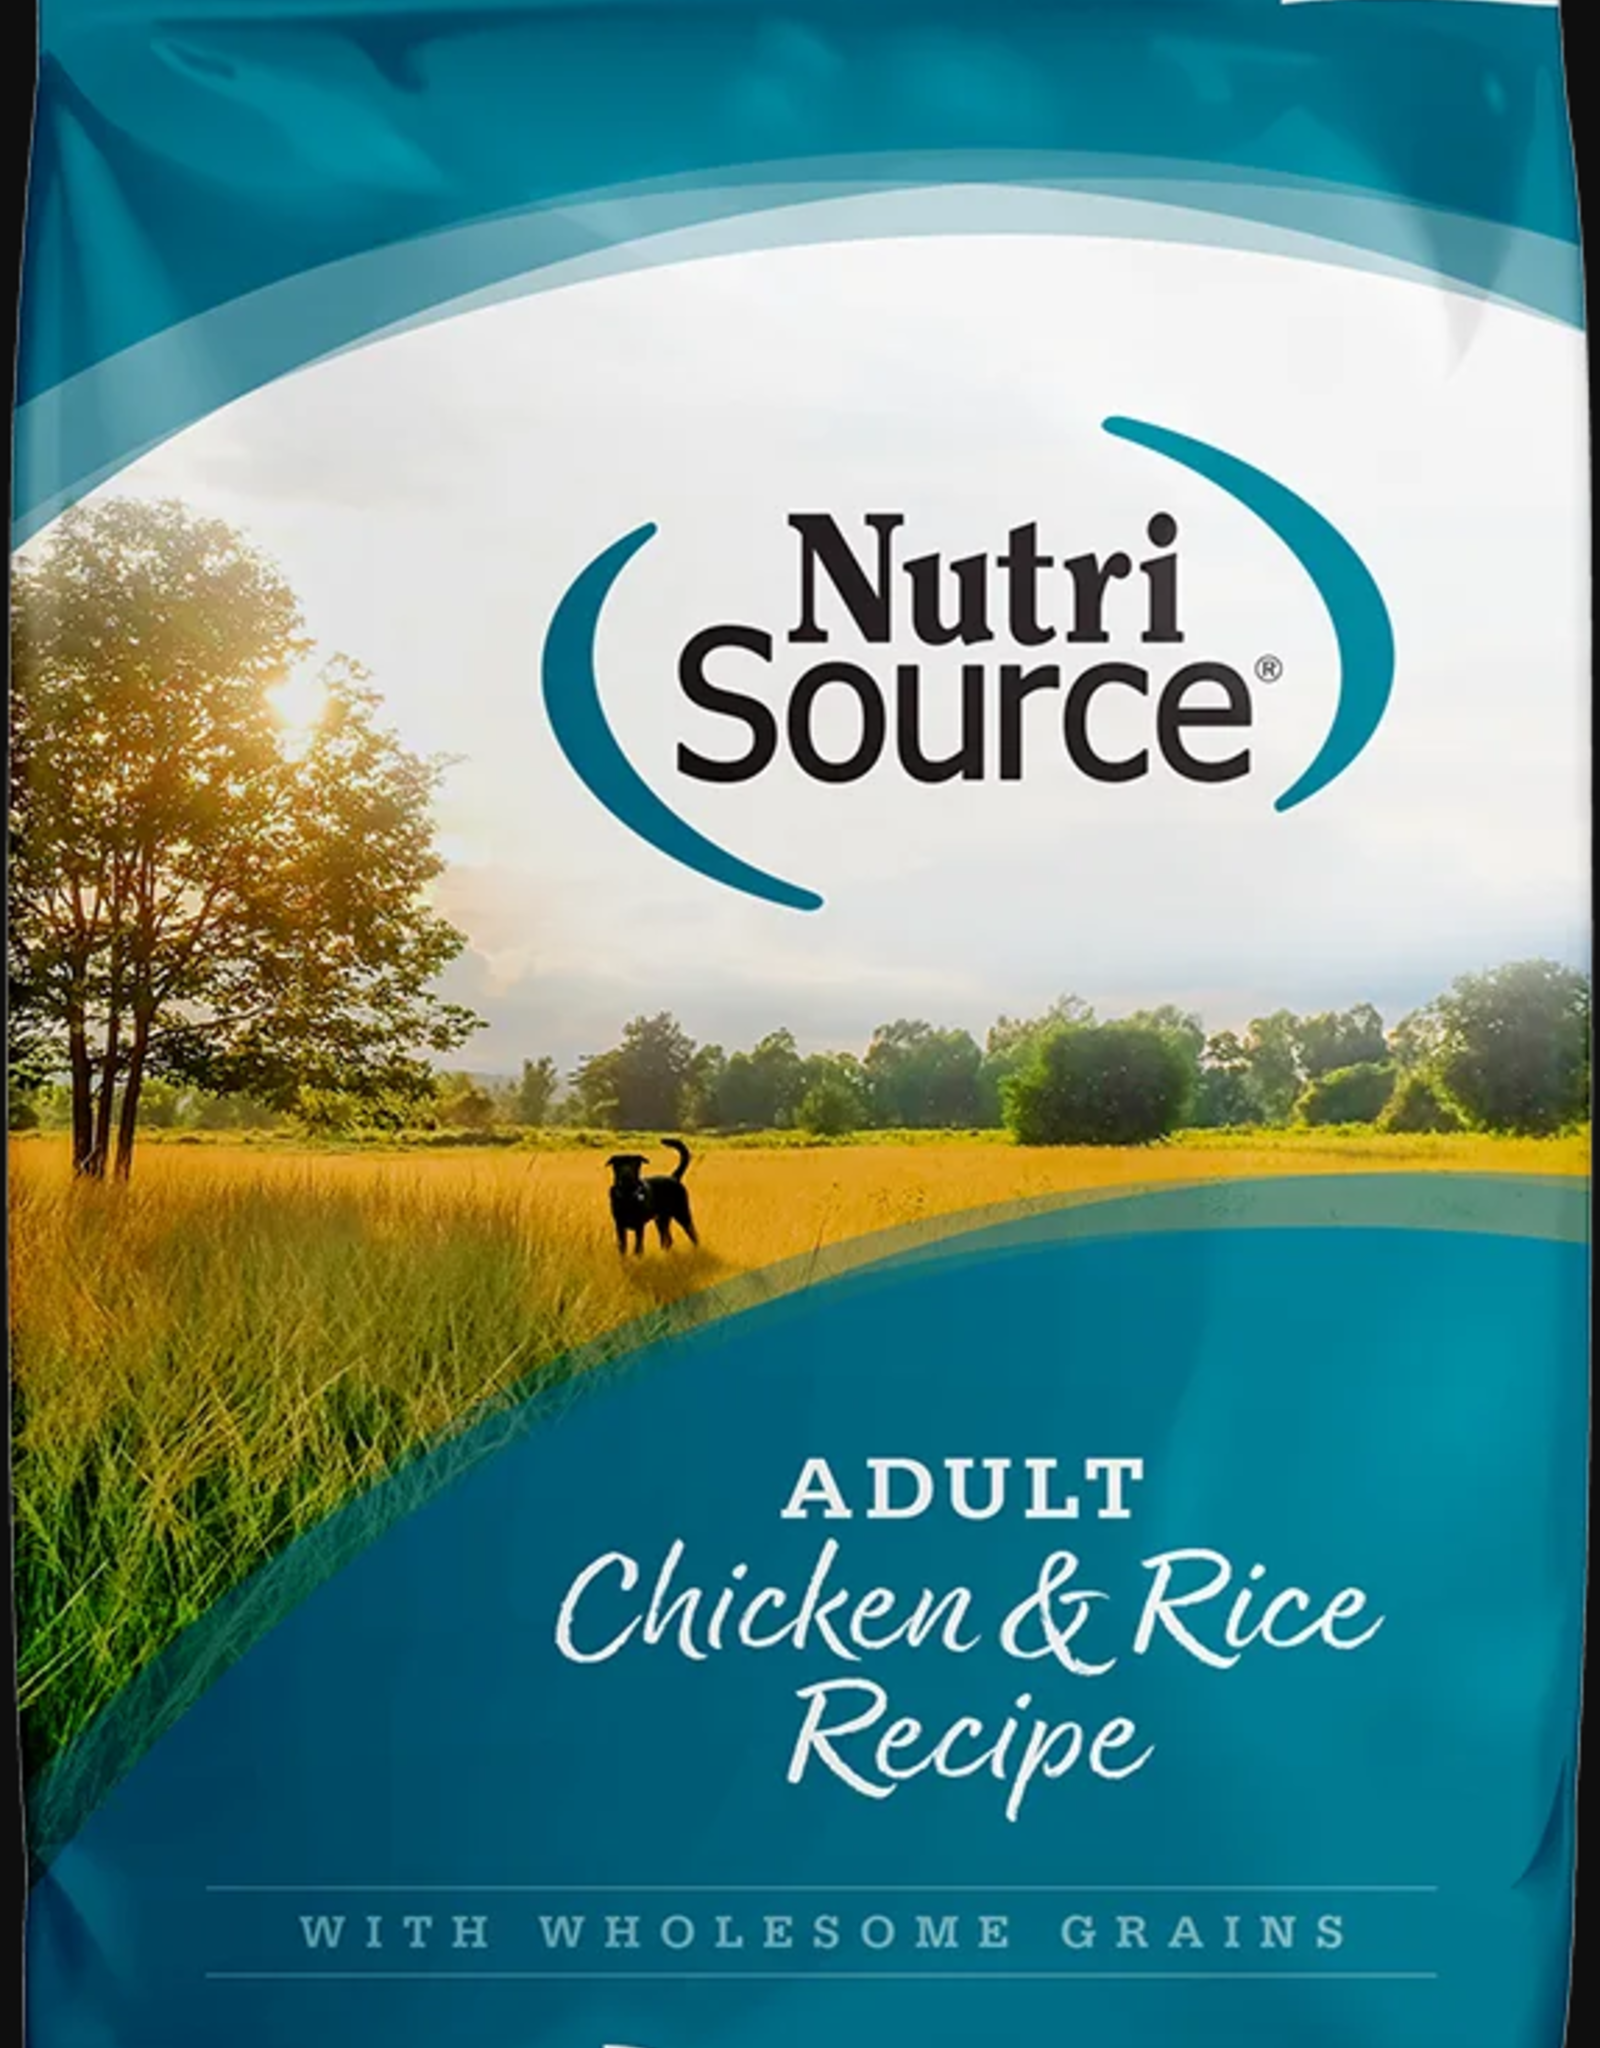 NUTRISOURCE DOG ADULT CHICKEN & RICE 5LBS - Pickering Valley Feed ...